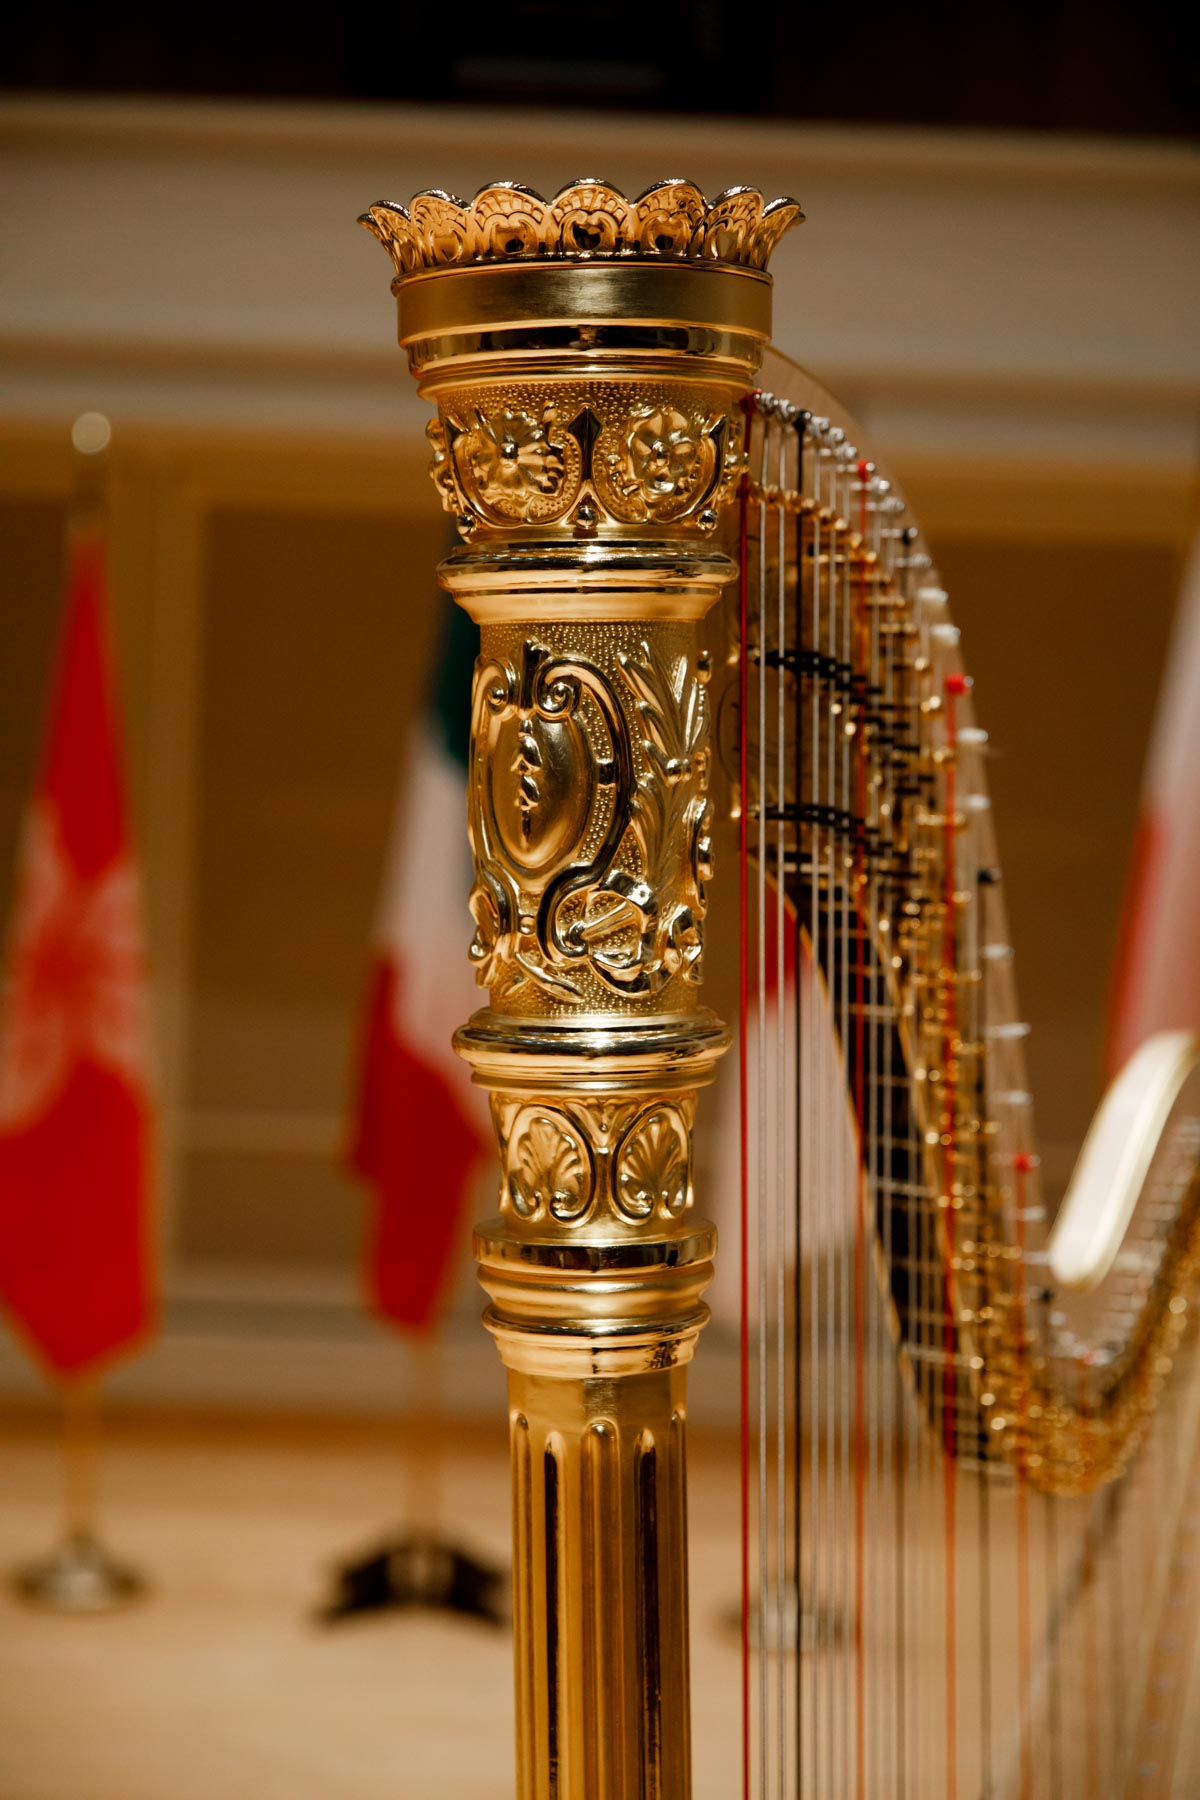 The Lyon and Healy Concert Grand Harp stands on stage during the 11th USA International Harp Competition at Indiana University in Bloomington, Indiana on Wednesday, July 3, 2019. (Photo by James Brosher)